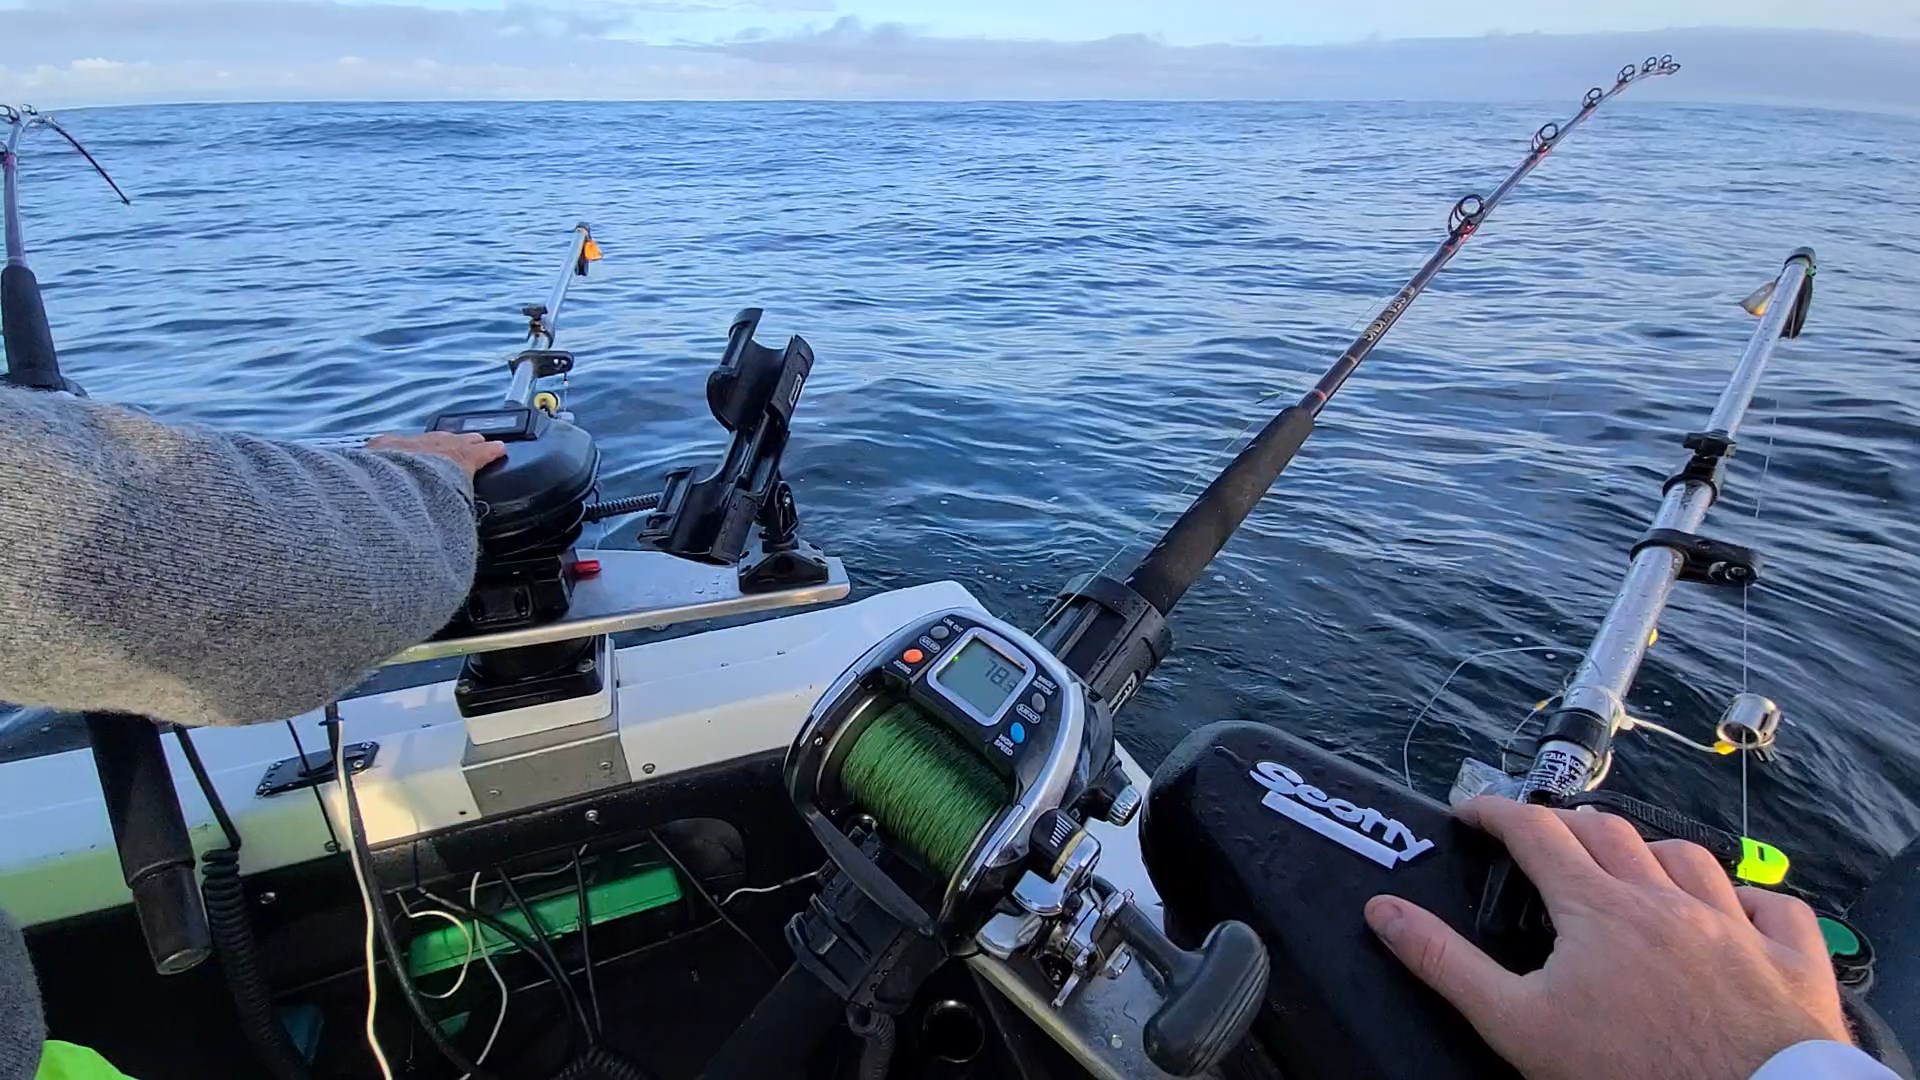 Reels of fishing rods onboard fishing boat on sunny day, with